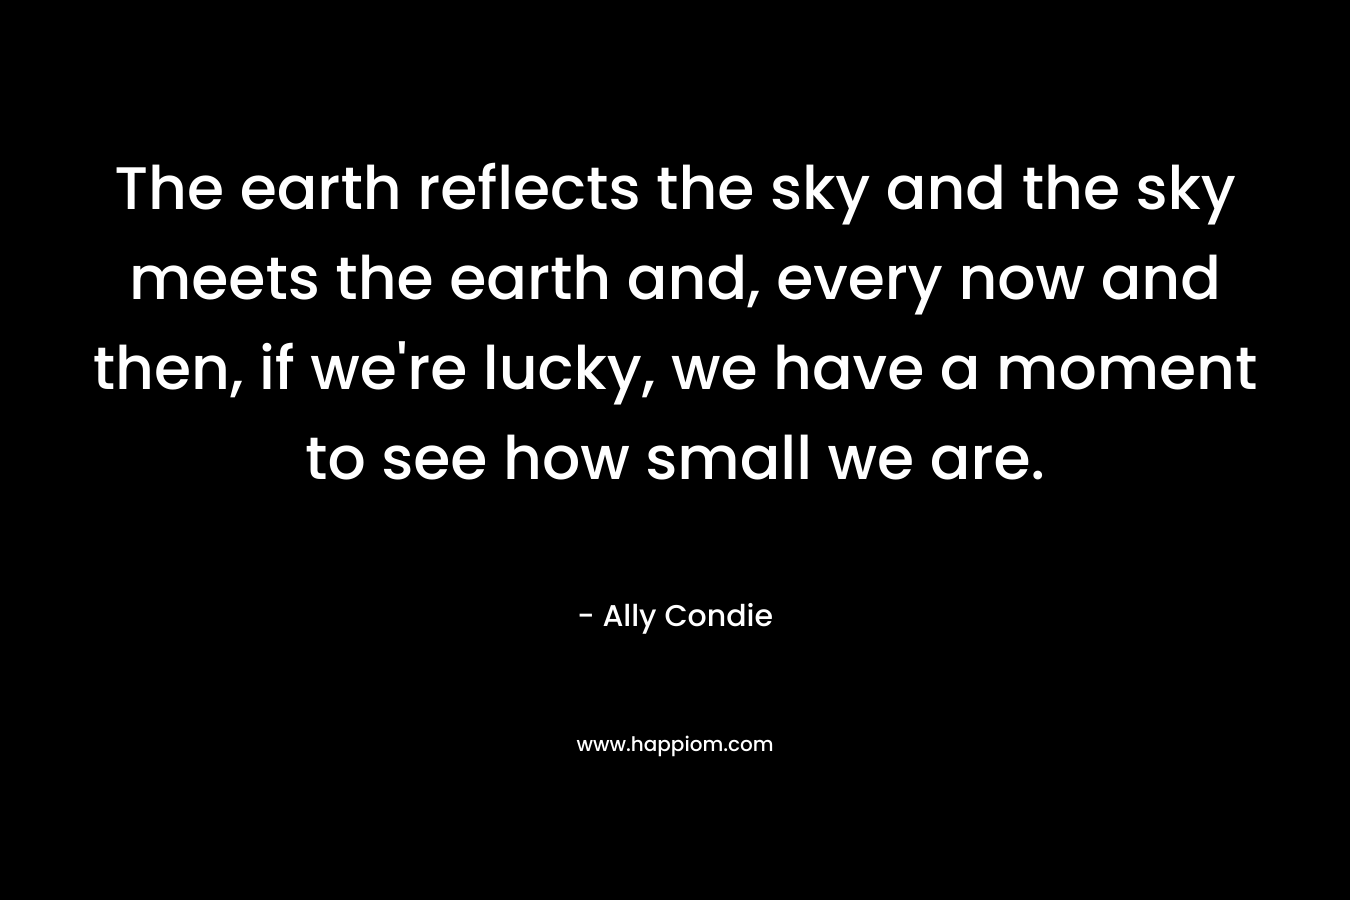 The earth reflects the sky and the sky meets the earth and, every now and then, if we're lucky, we have a moment to see how small we are.